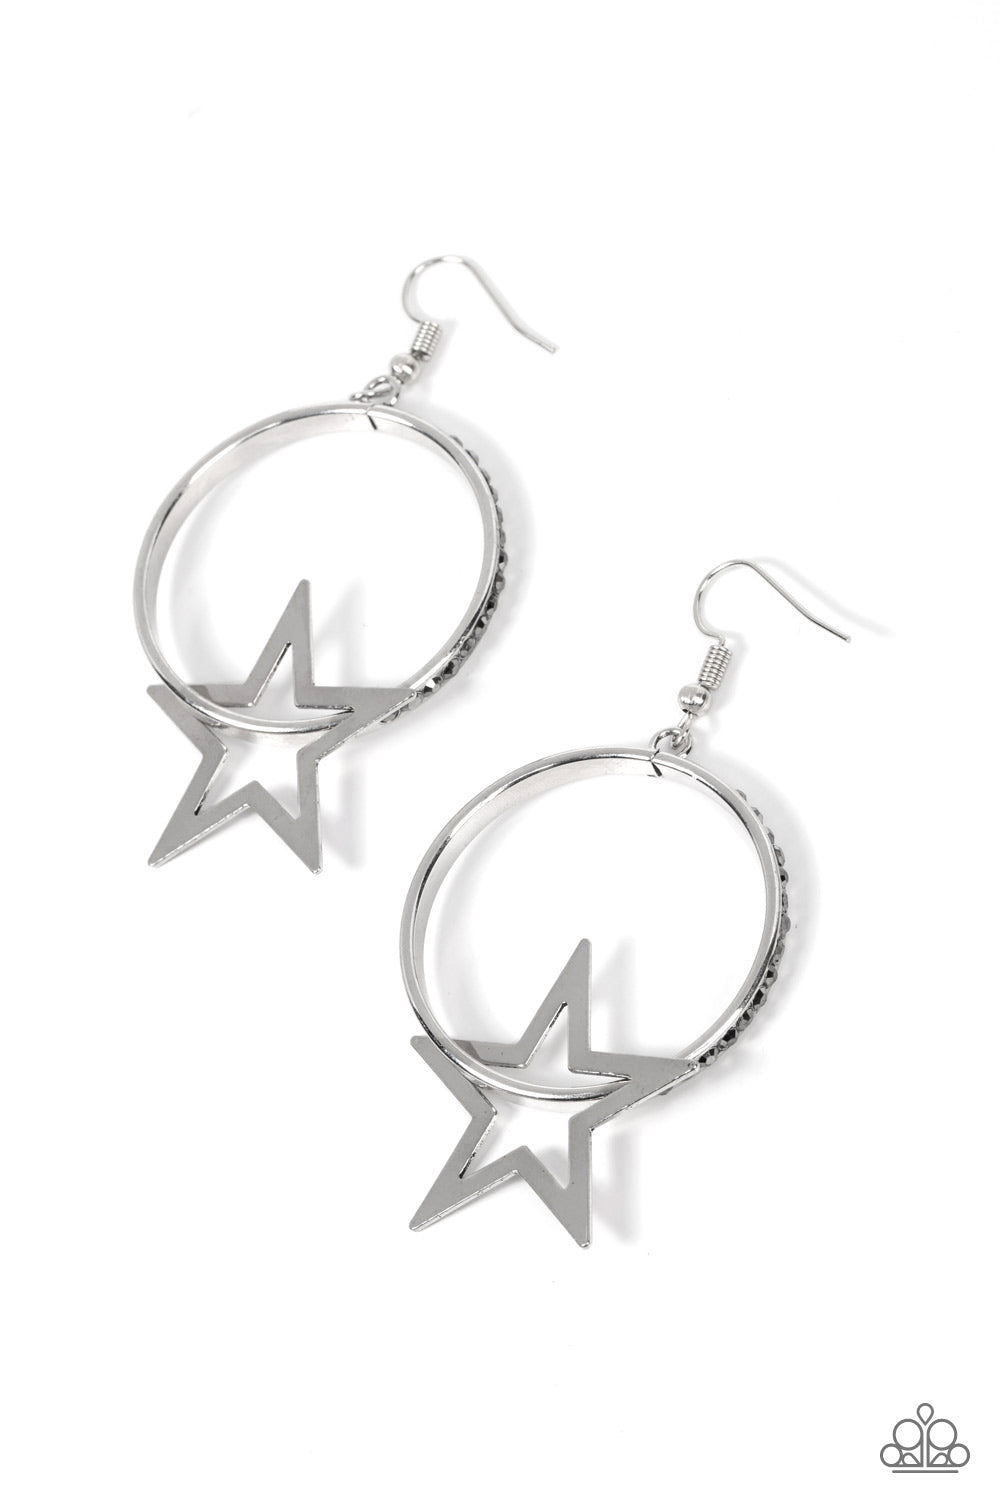 Superstar Showcase - Silver Earrings - Paparazzi Accessories - A flat silver star glides along a silver hoop, resulting in a stellar fashion. The front of the silver hoop is encrusted in smoky hematite rhinestones for a glitzy finish.